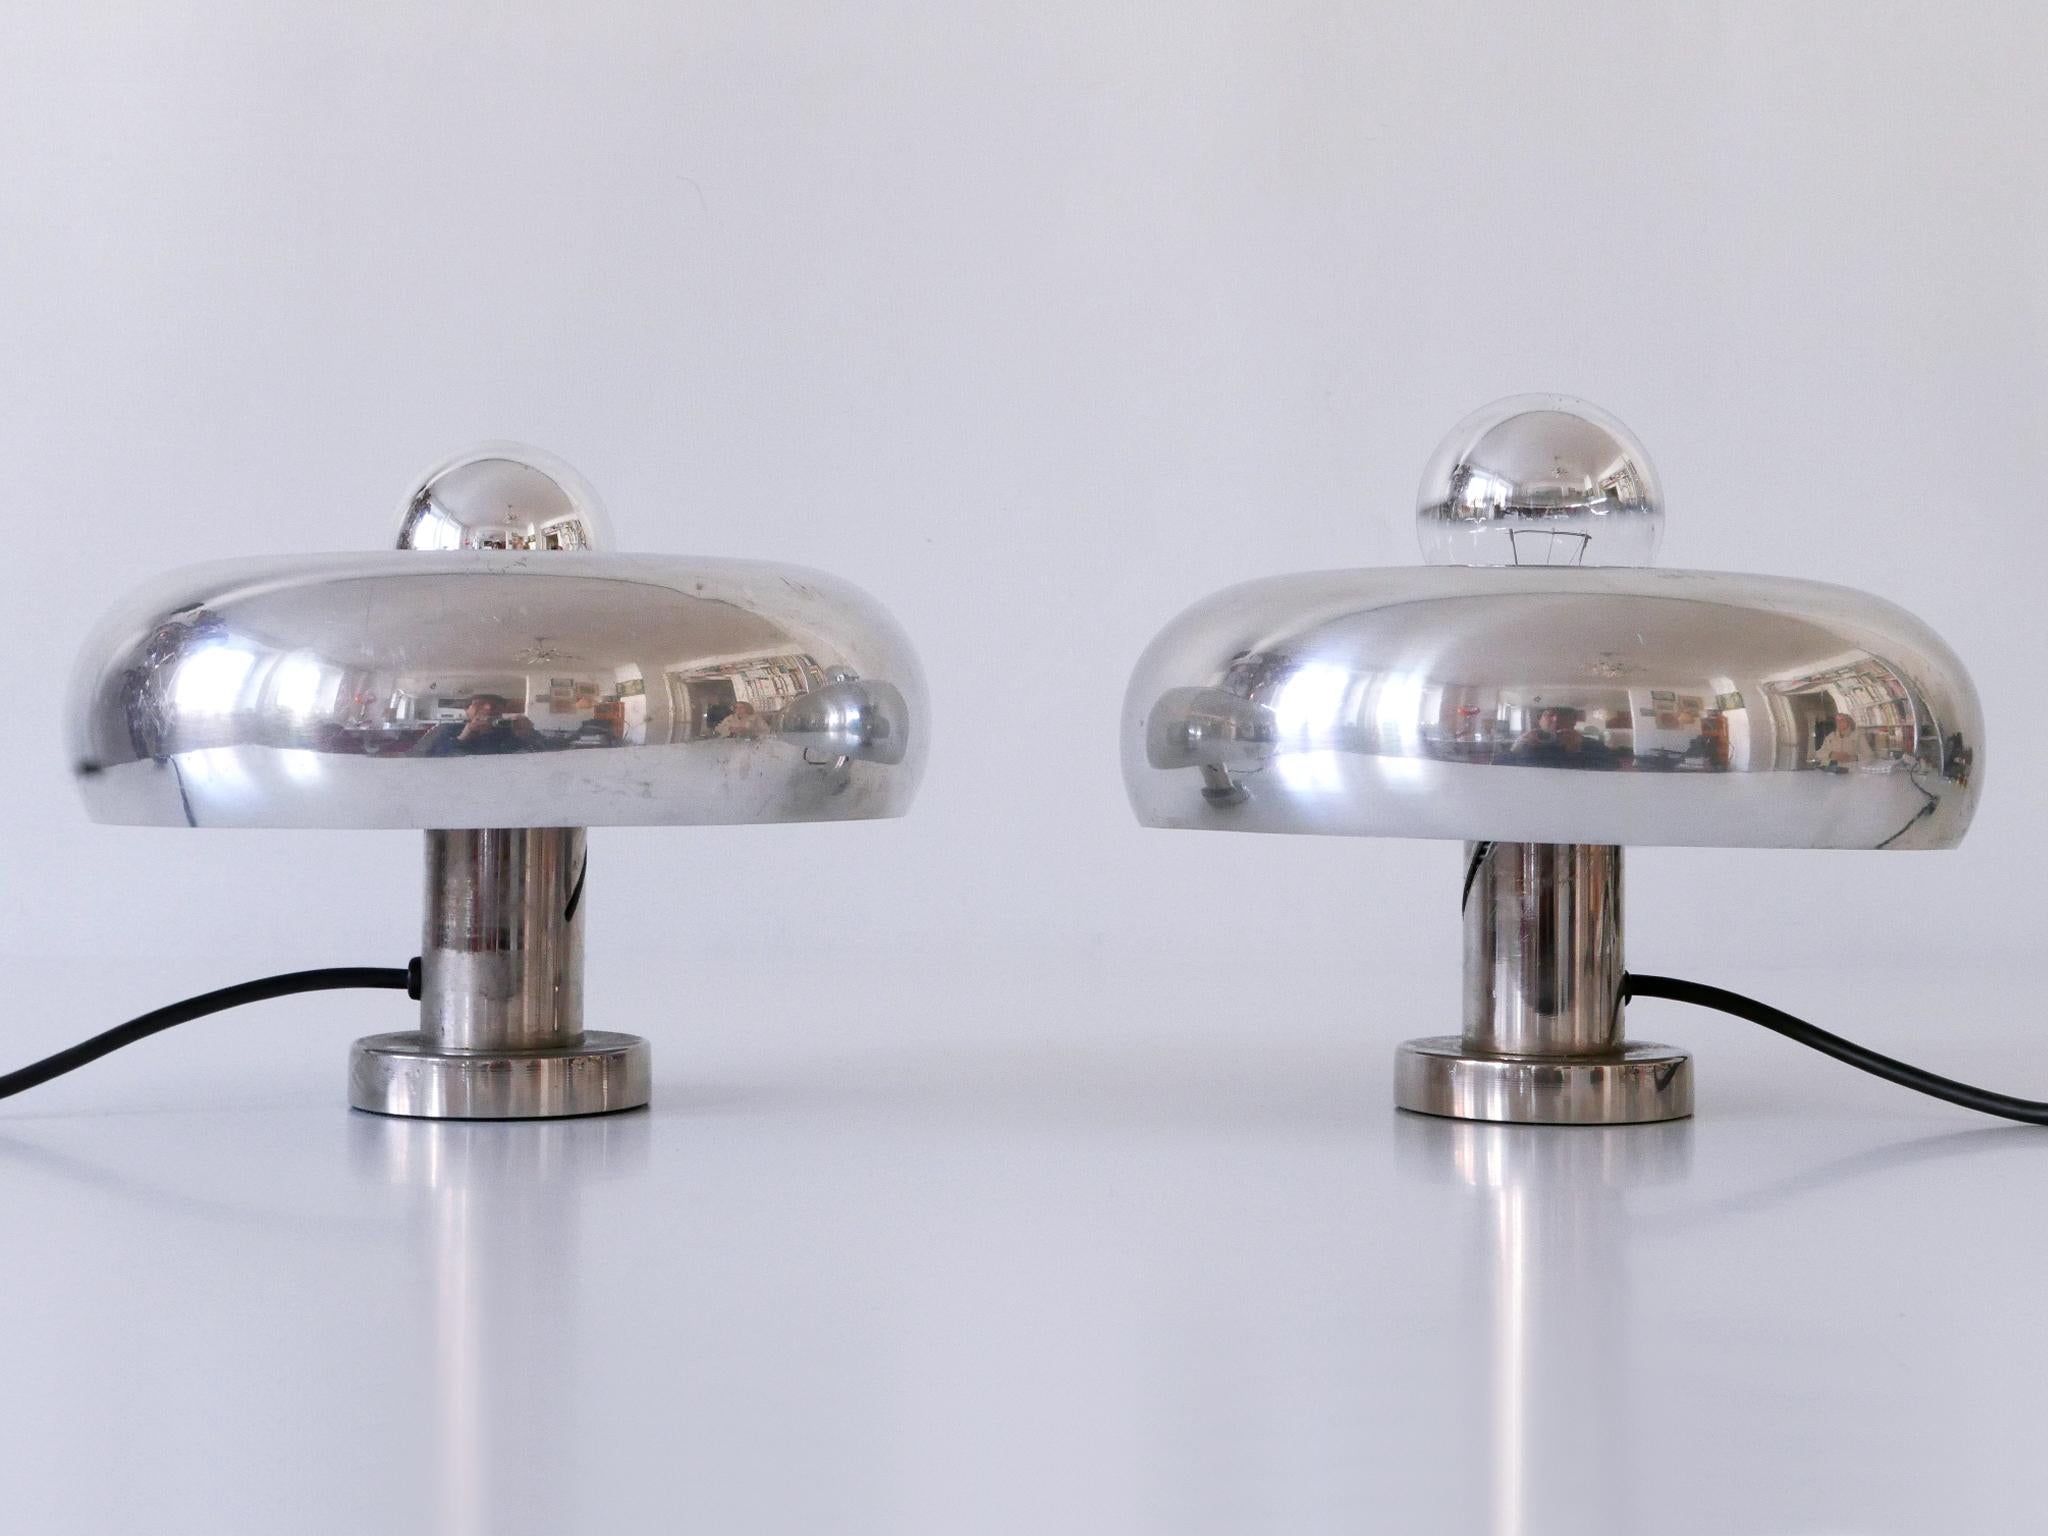 Set of Two Table Lamps or Sconces Pox by Ingo Maurer for Design M Germany, 1960s For Sale 6